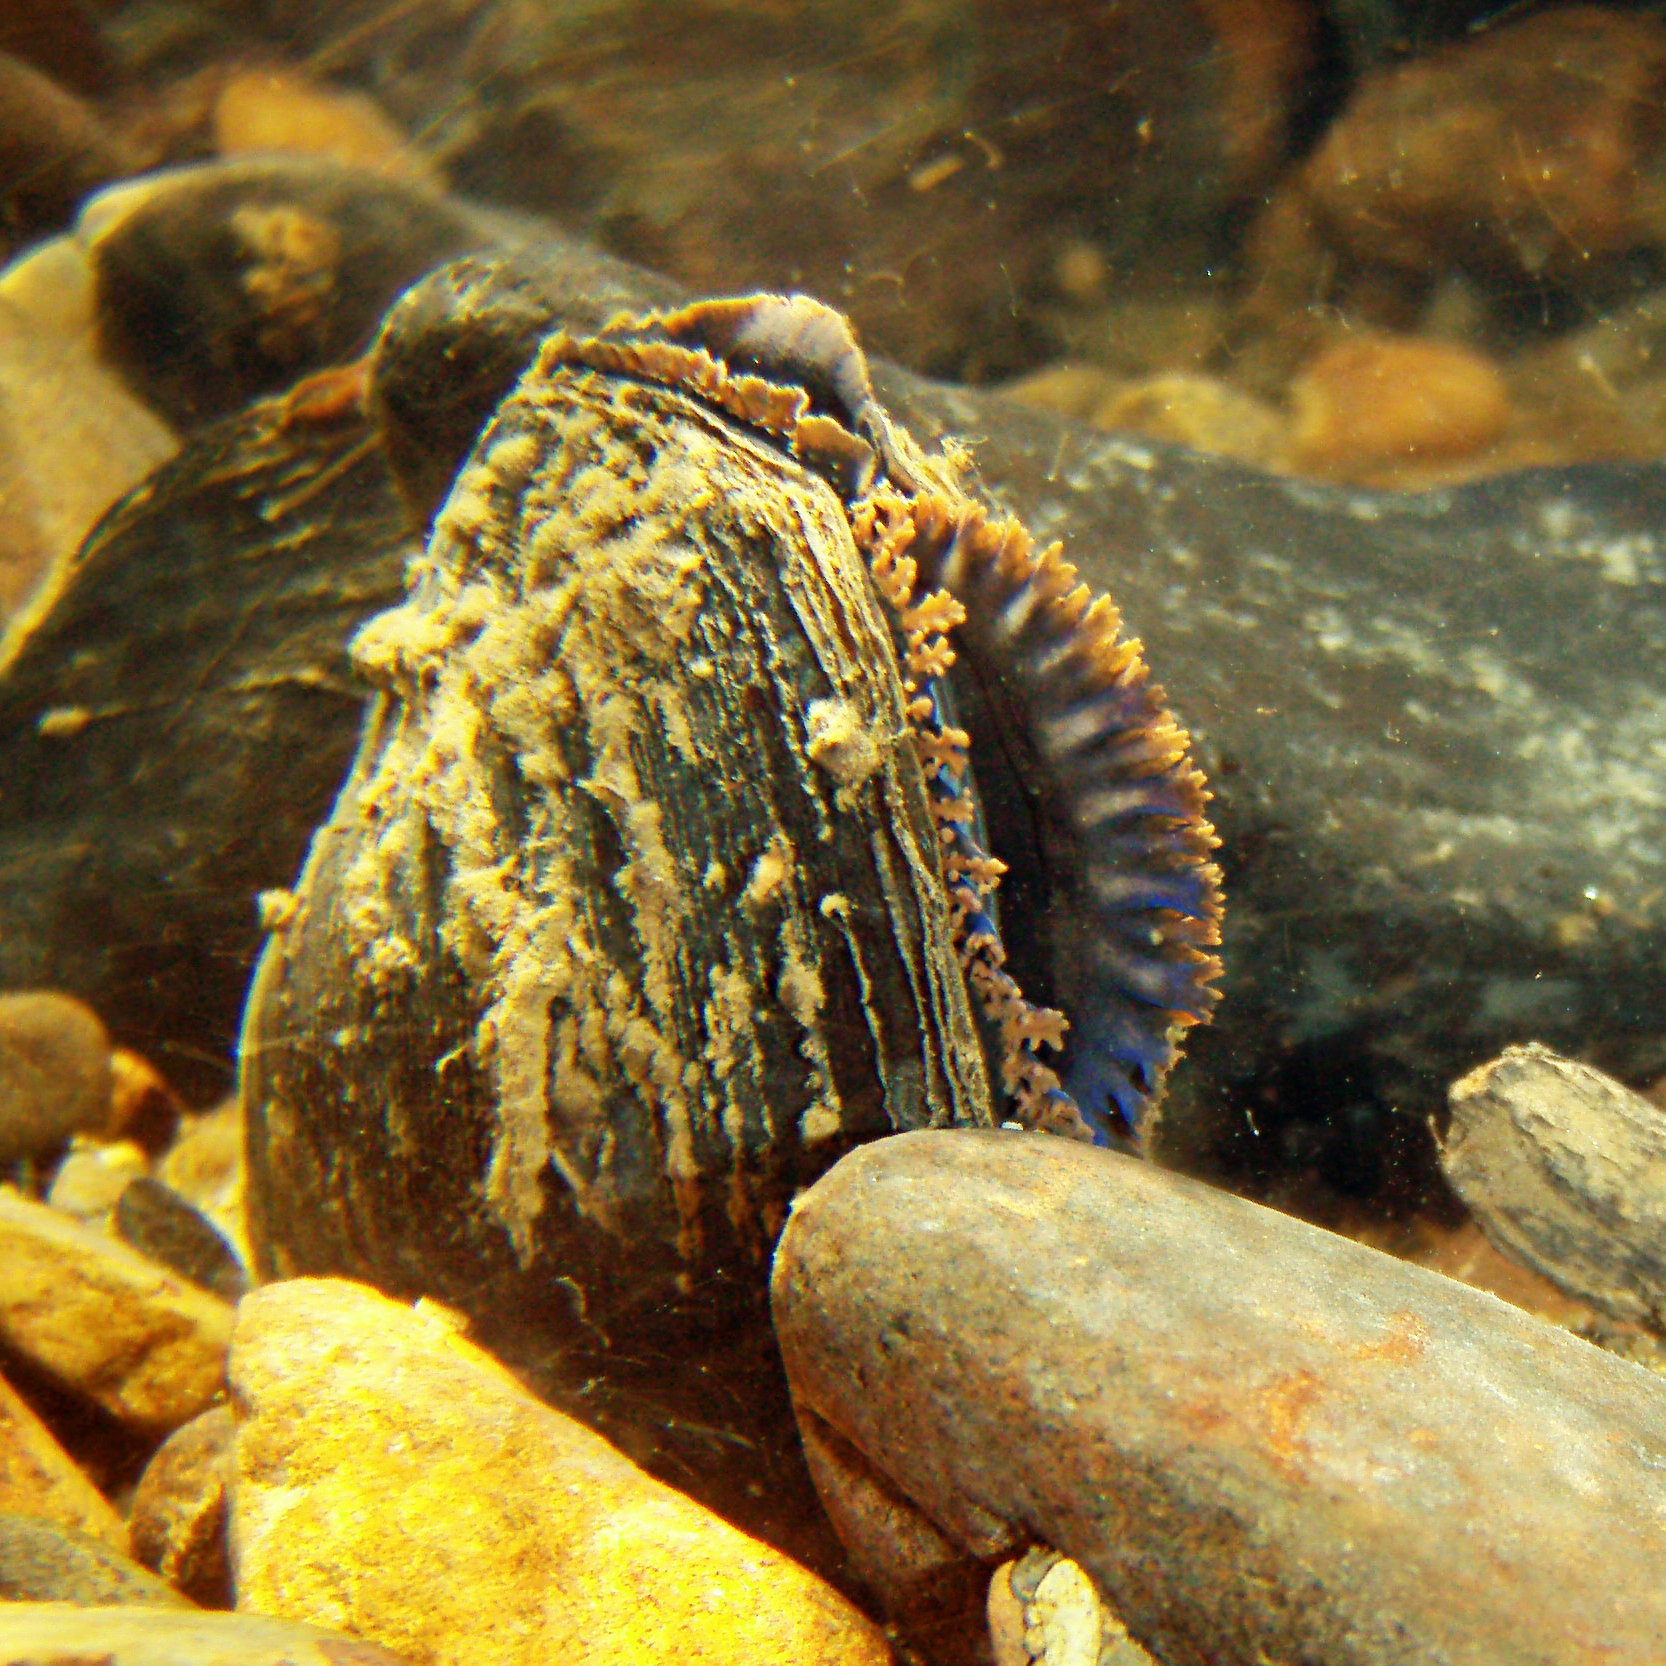 An underwater closeup of a mussel that has its shell partially opened to feed, exposing blue and orange fringe around the opening.